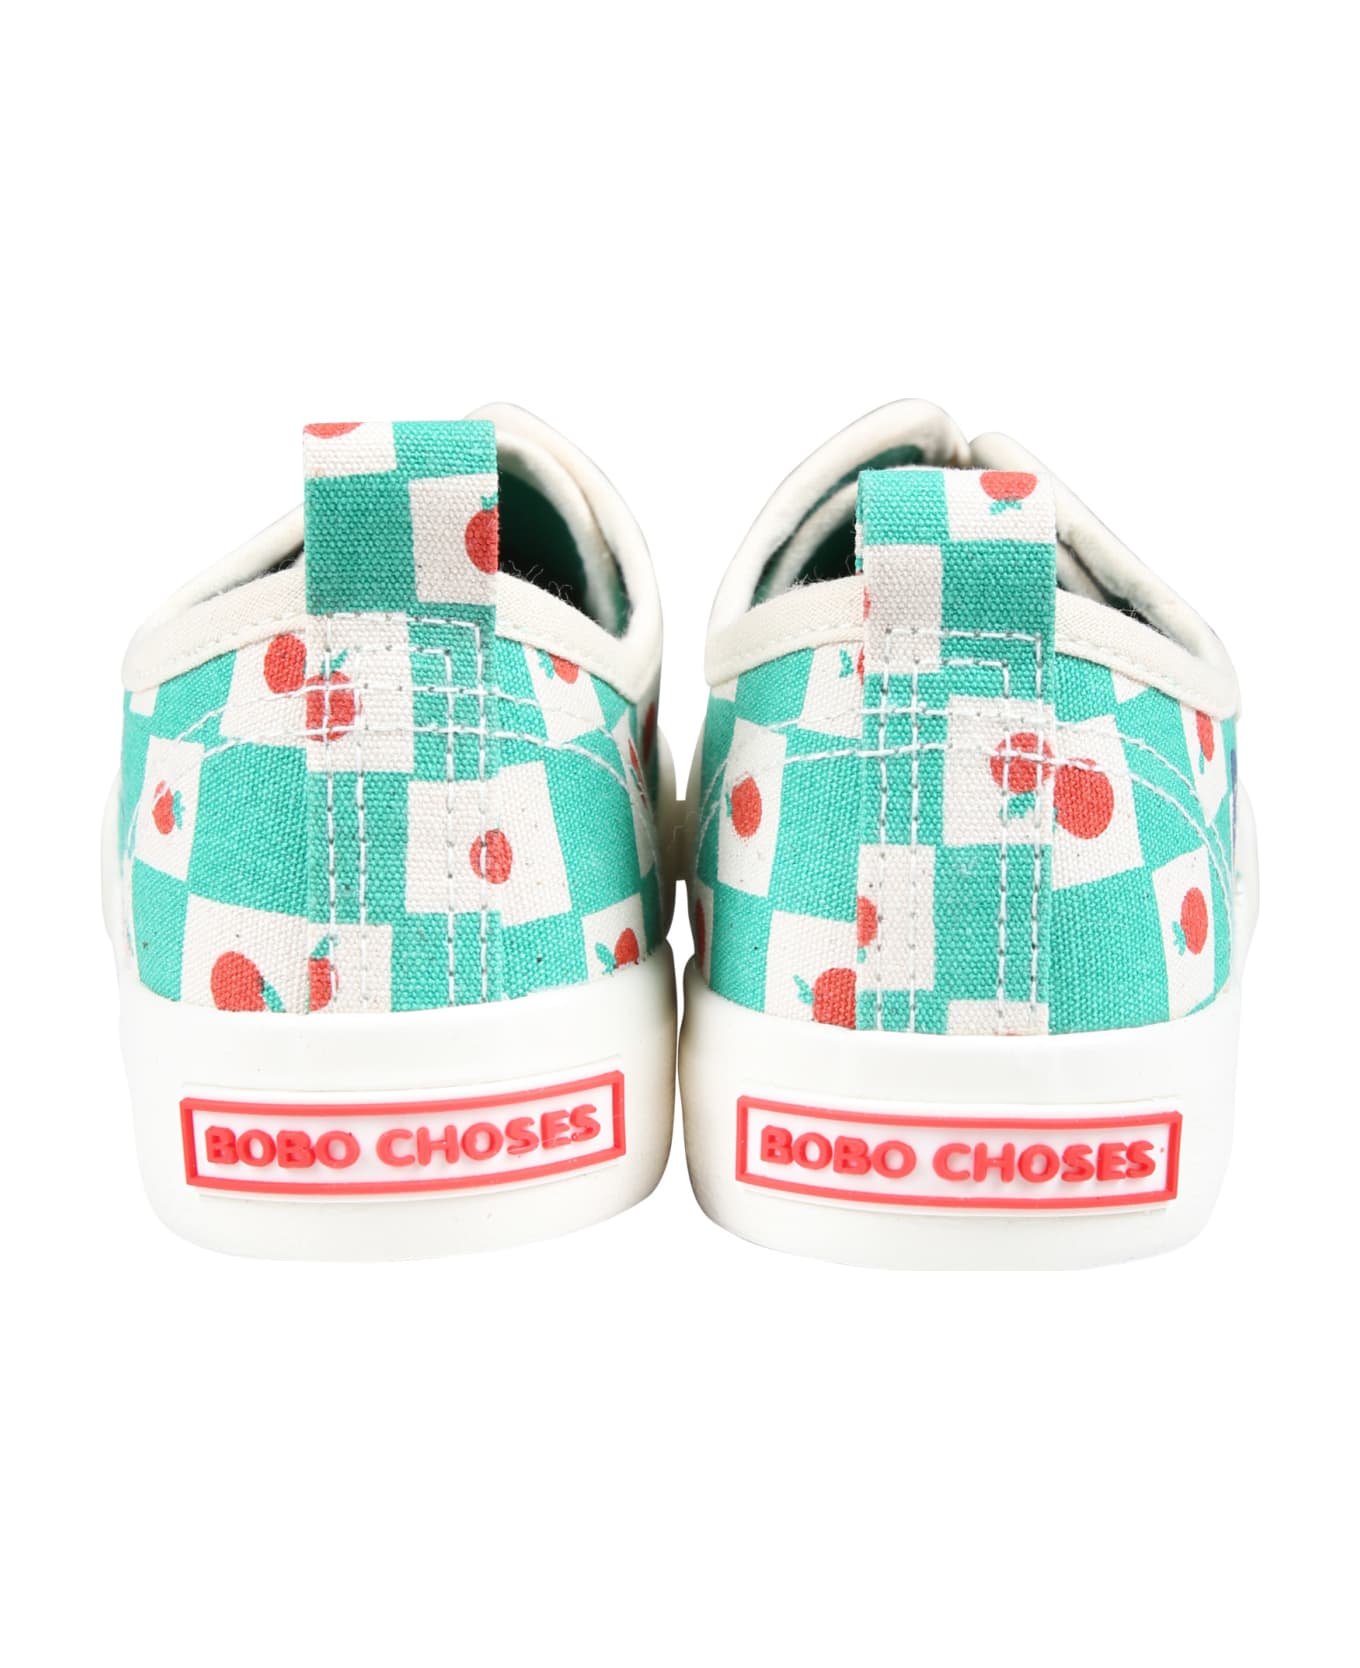 Bobo Choses Green Sneakers For Kids With Tomatoes - Green シューズ